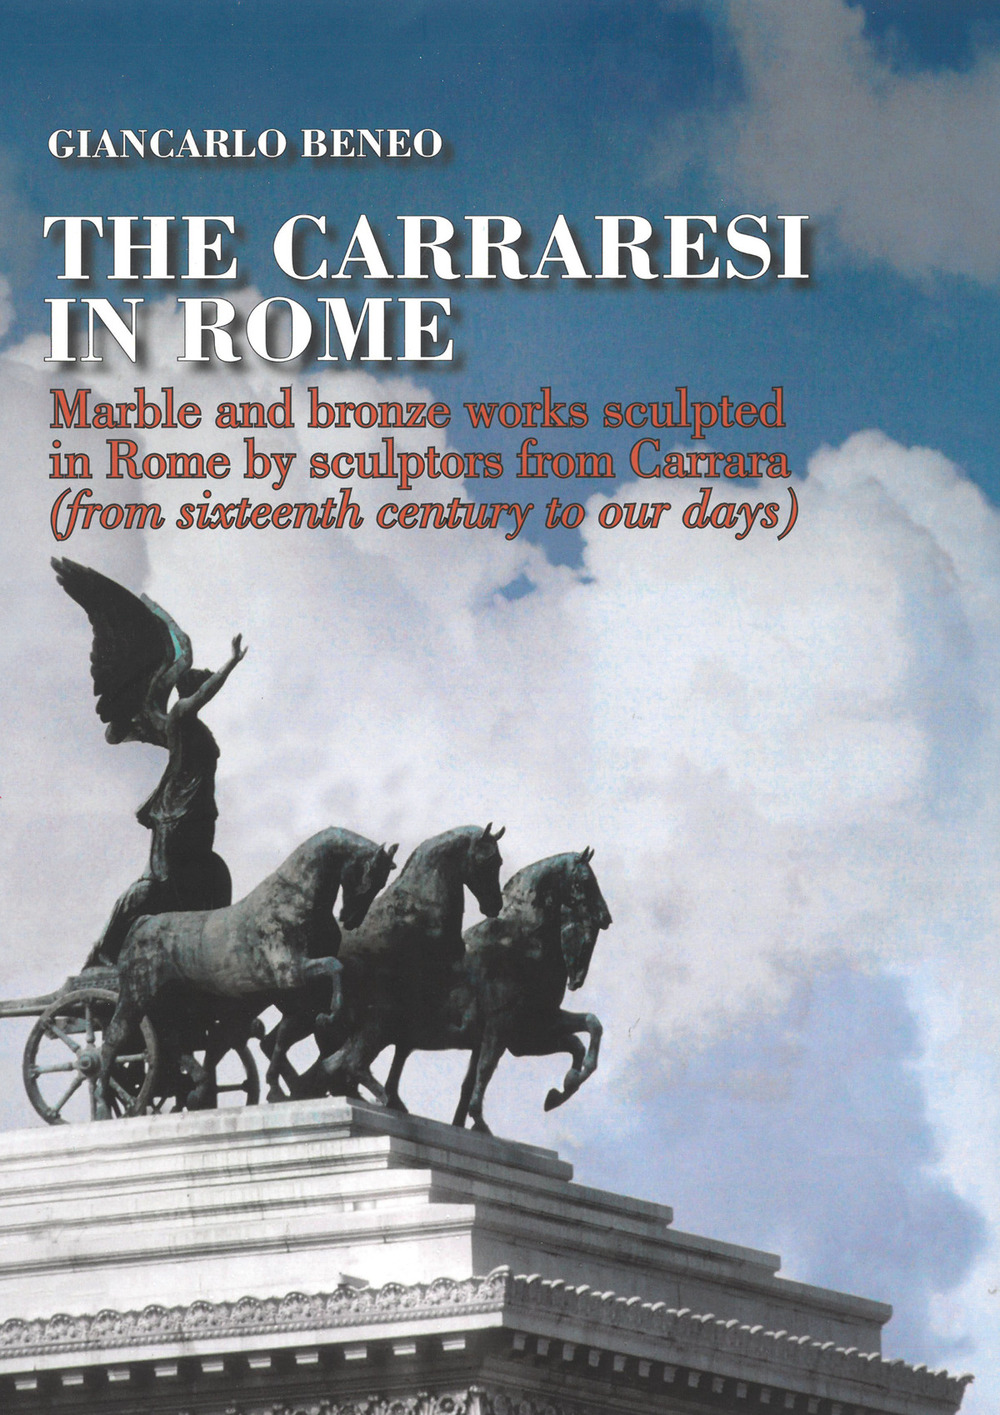 The Carraresi to Rome. Marble and bronze works sculpted in Rome by sculptors from Carrara (from Sixteenth century to our days). Ediz. illustrata